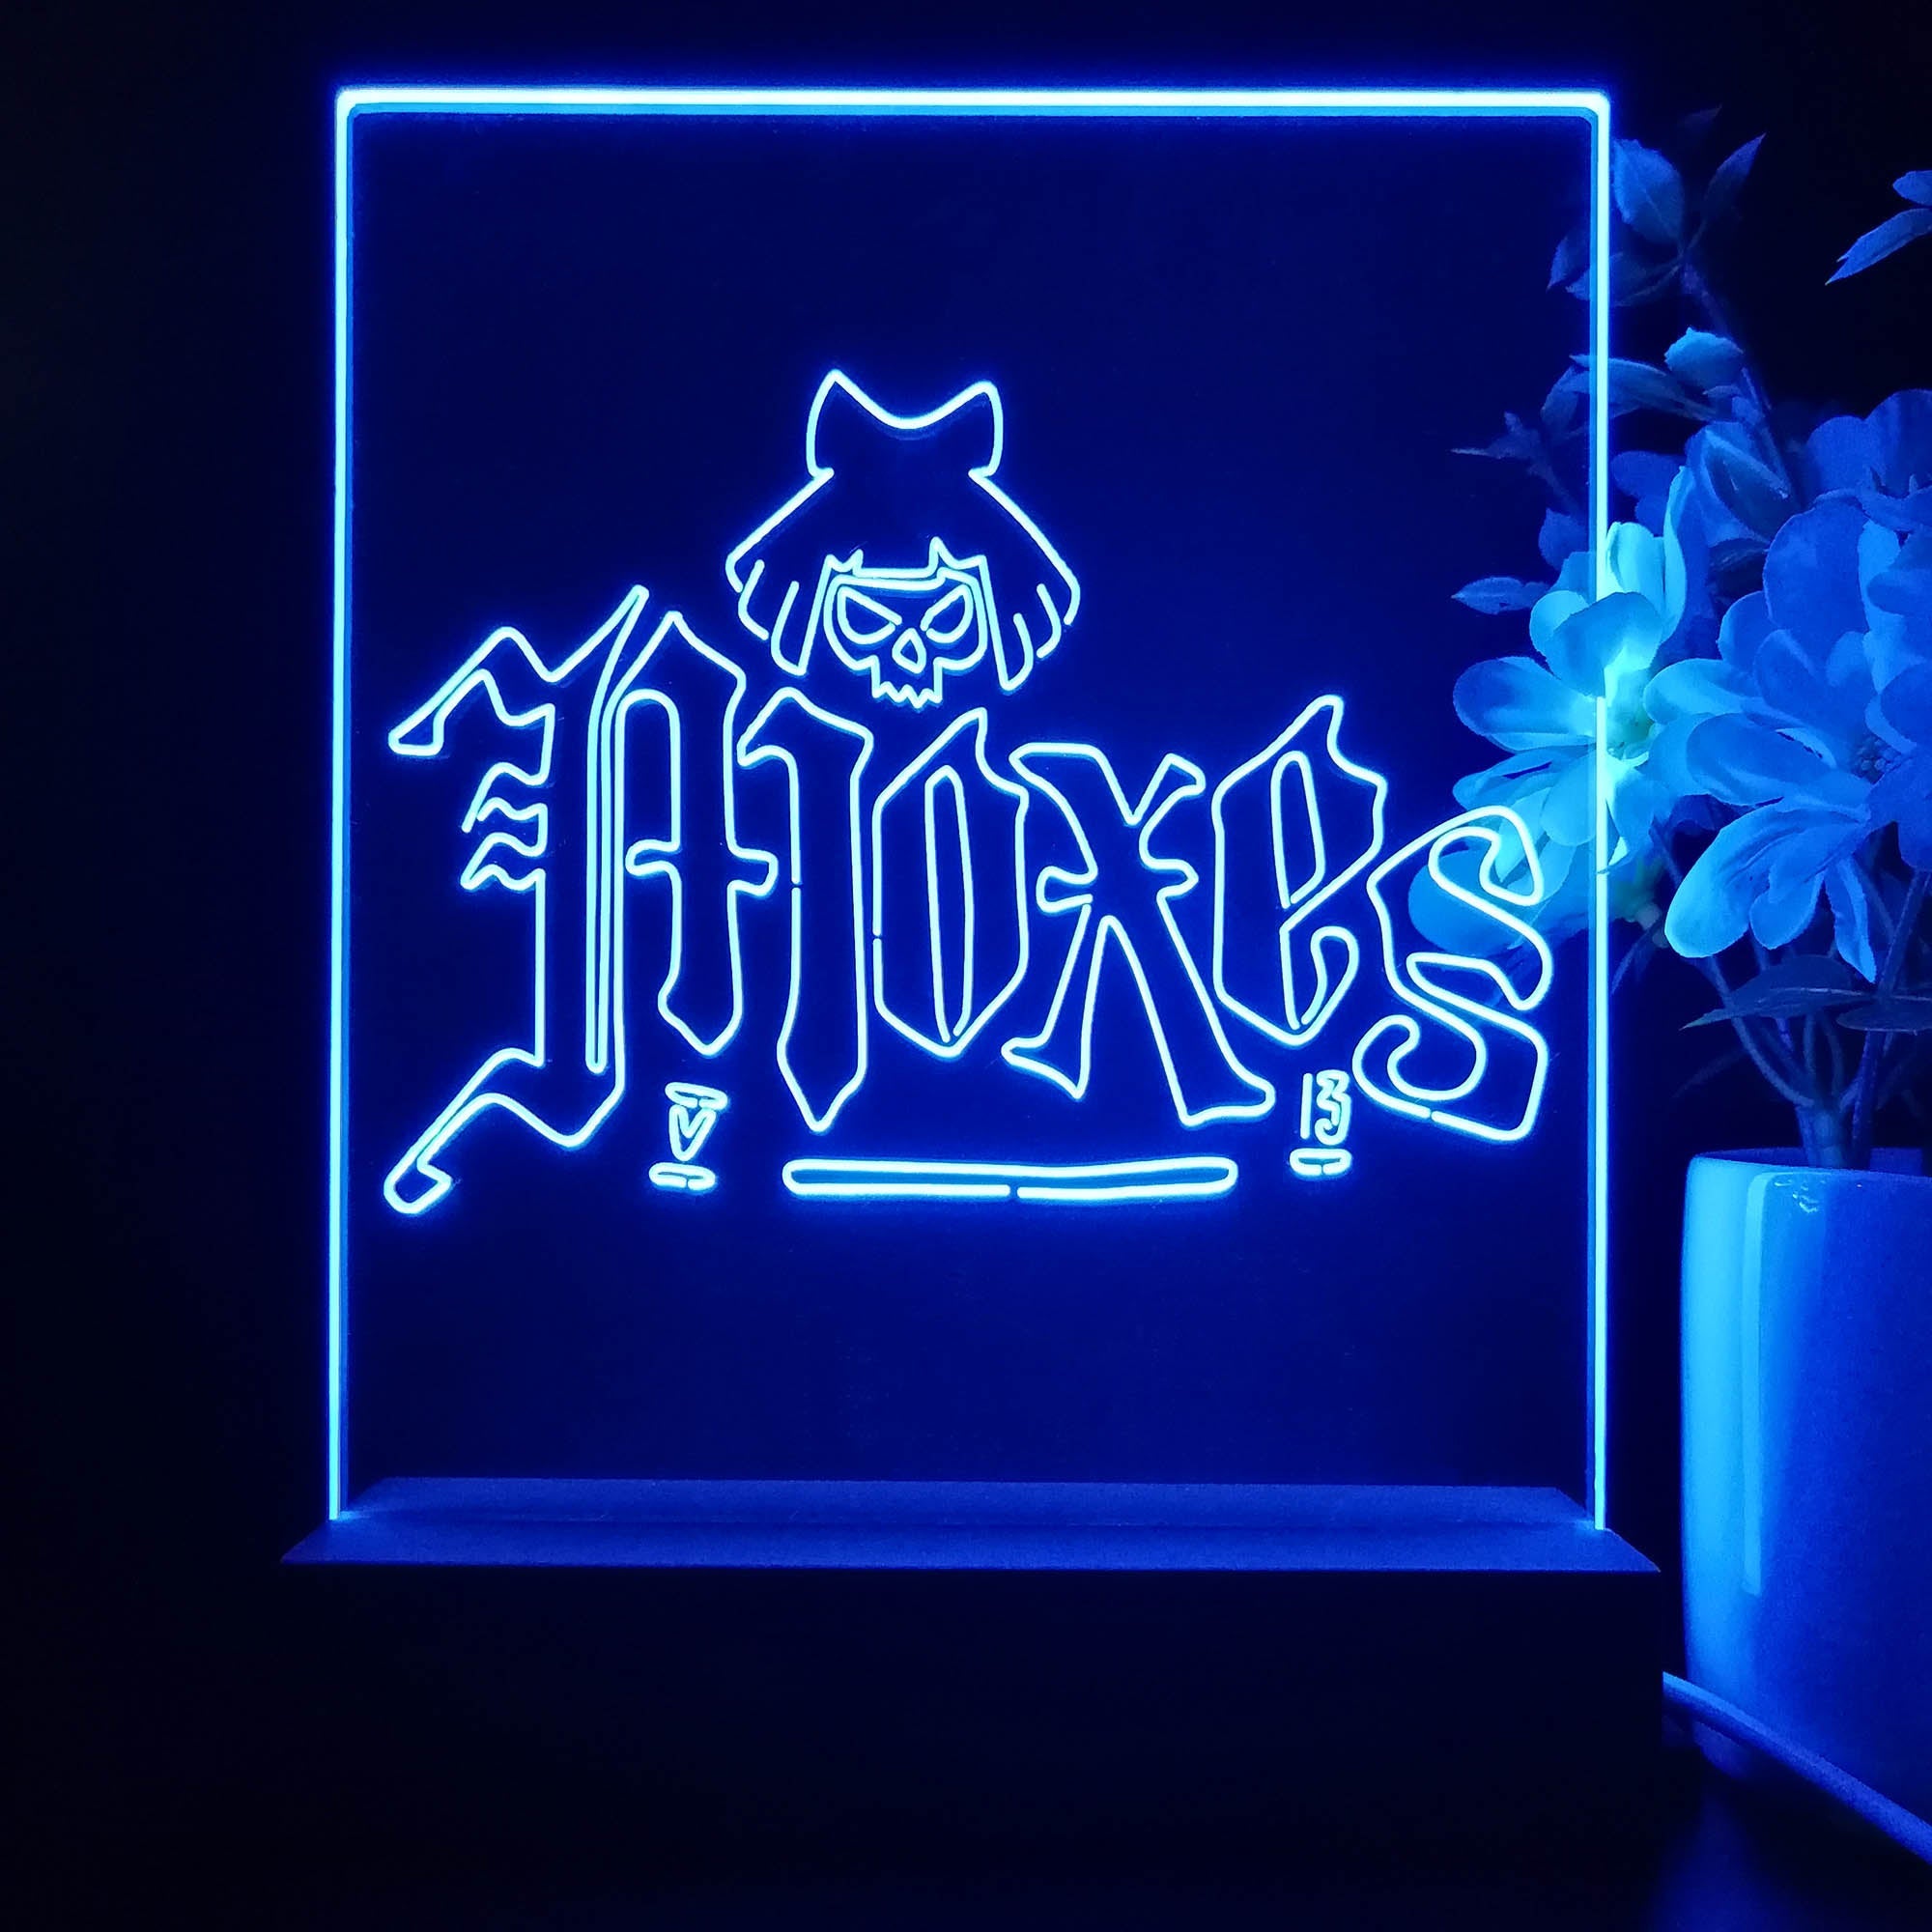 Cyberpunk 2077 Moxes Game Room LED Sign Lamp Display